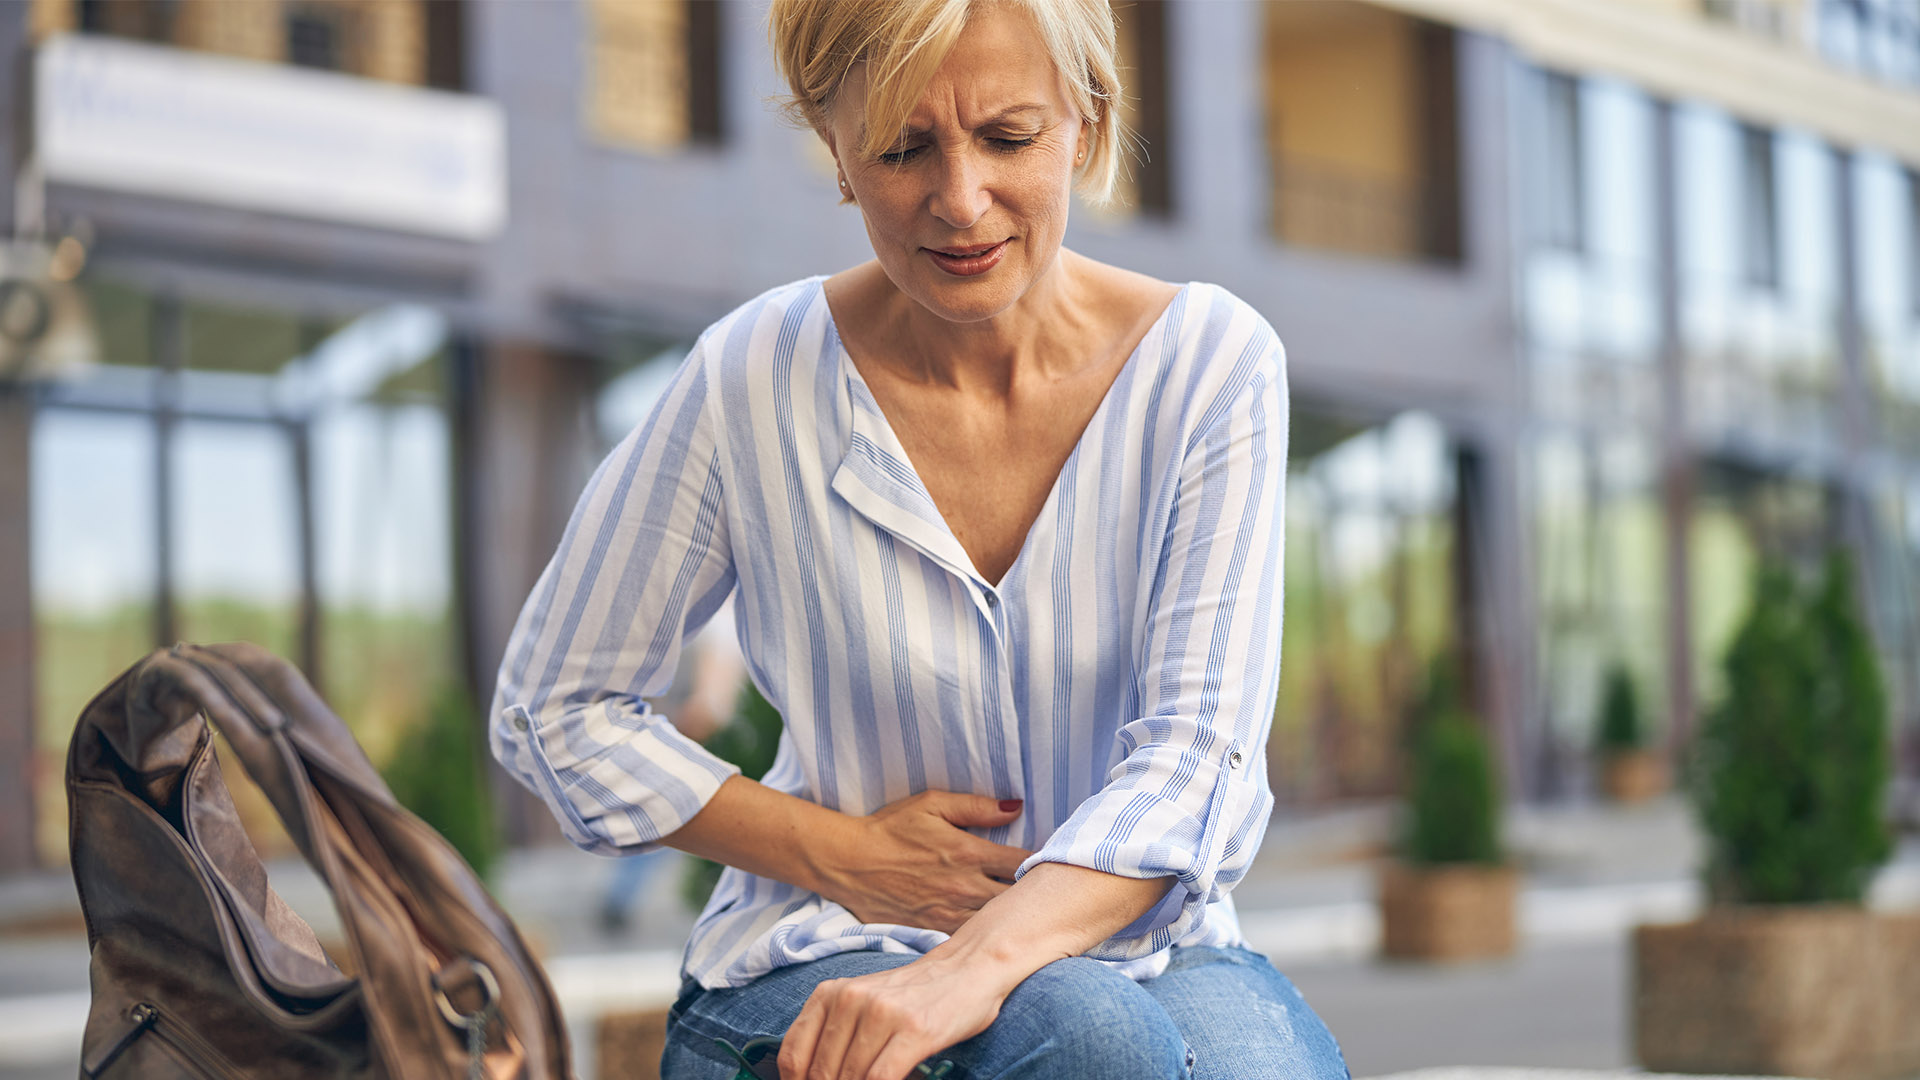 Digestive Problems? Menopause Might Be To Blame